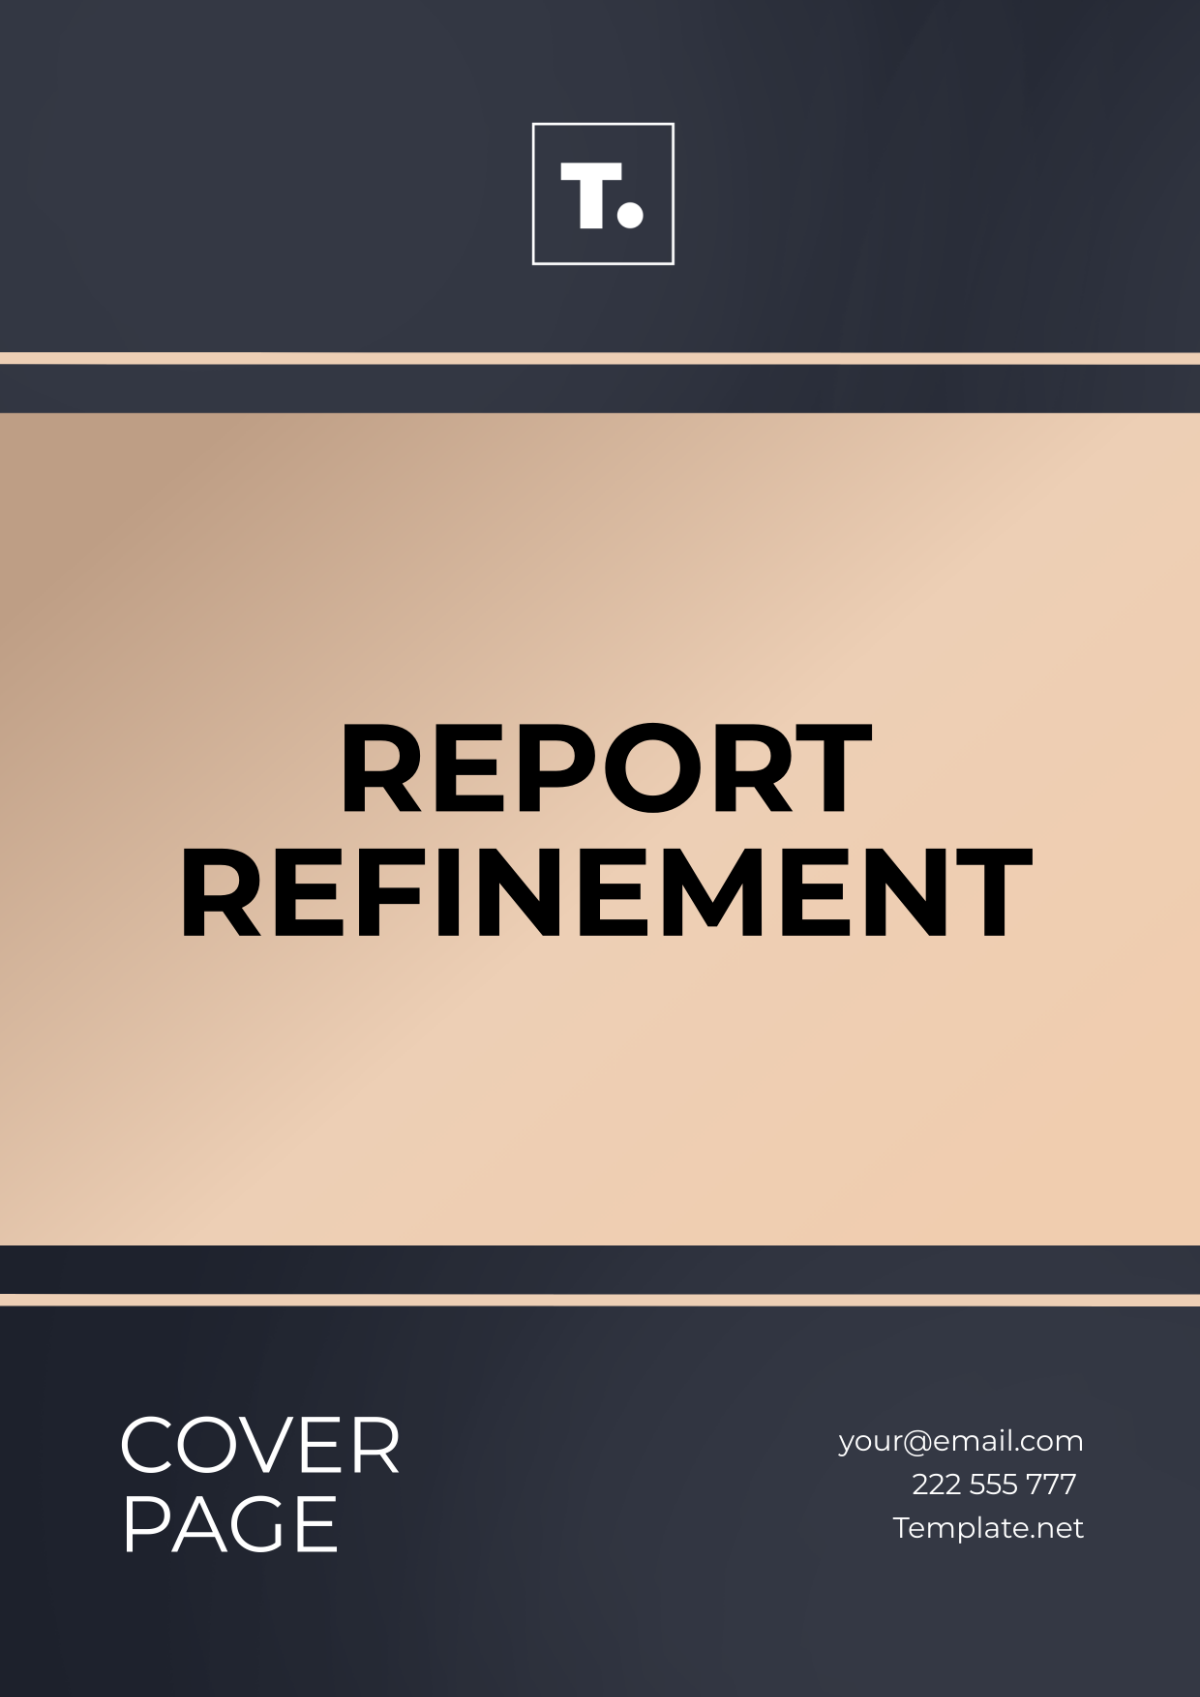 Report Refinement Cover Page Template